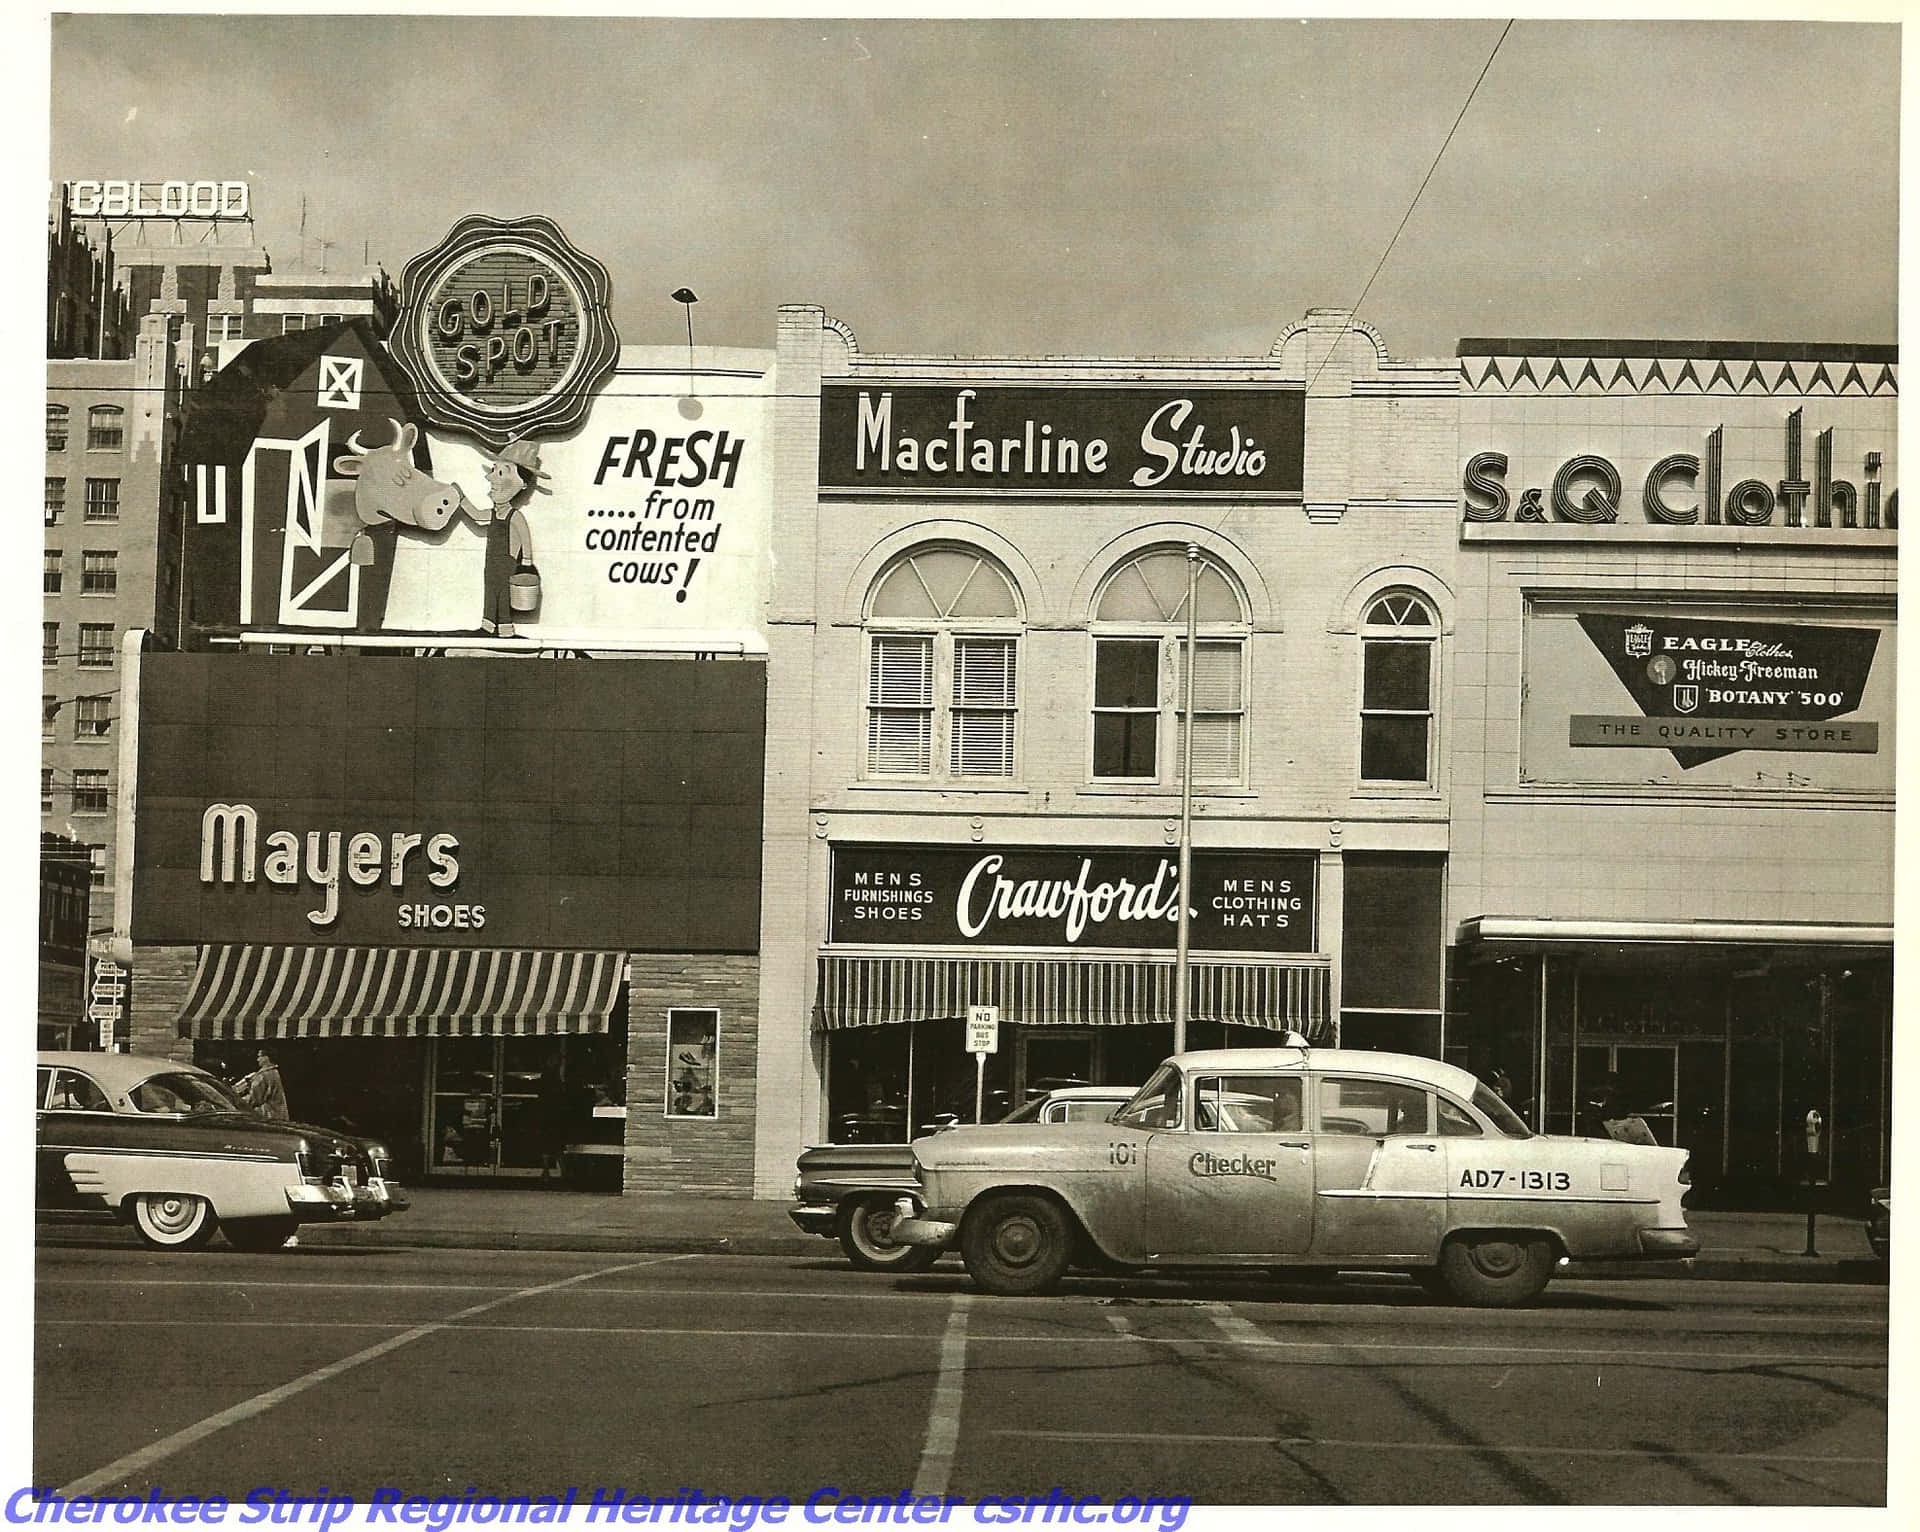 Classic image from 1950s depicting historic Main Street